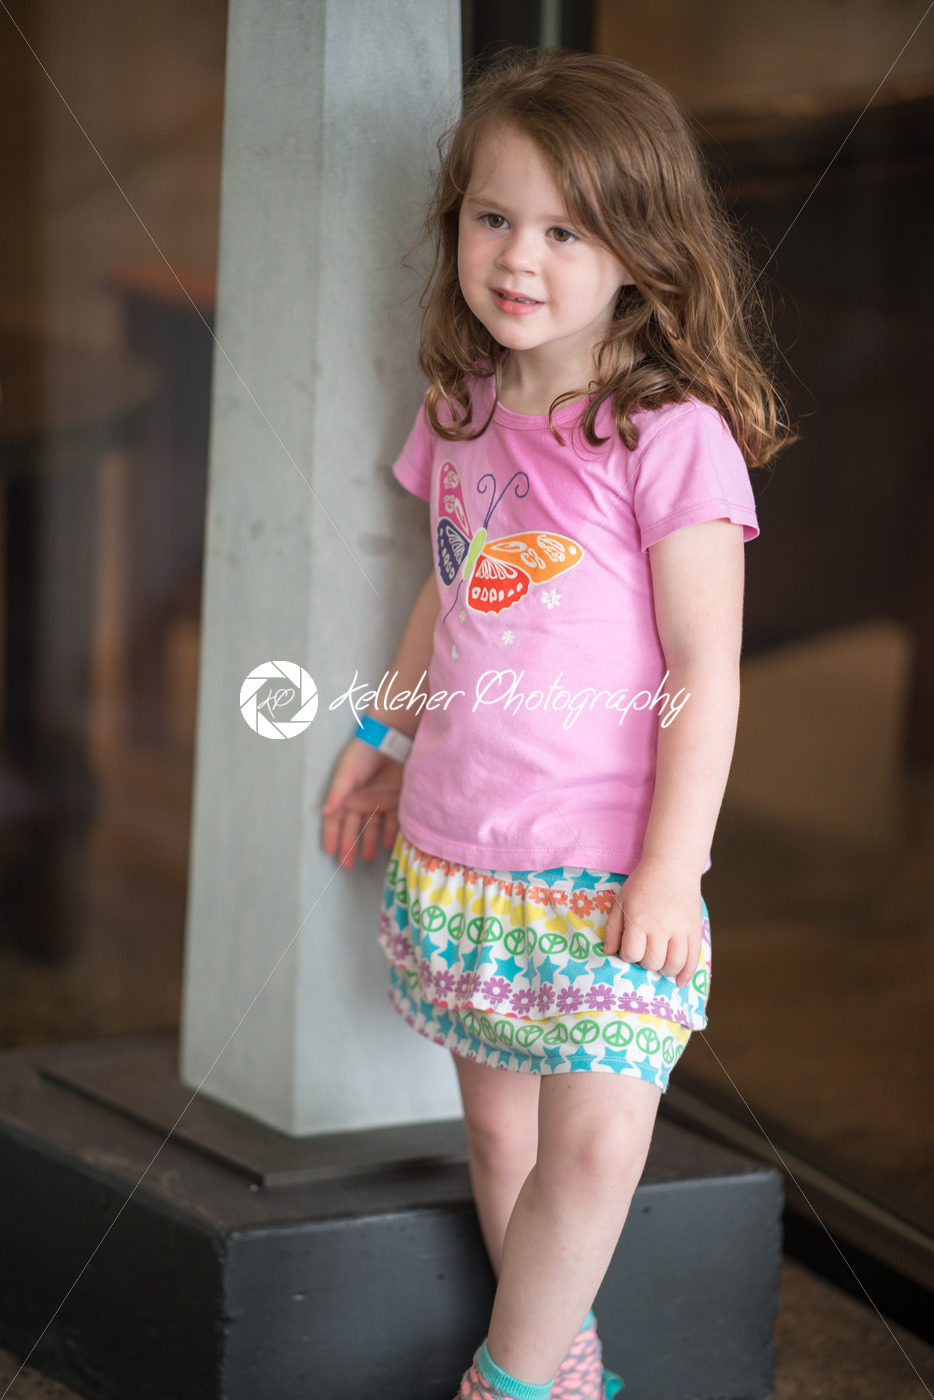 Cute young girl wearing pink top - Kelleher Photography Store